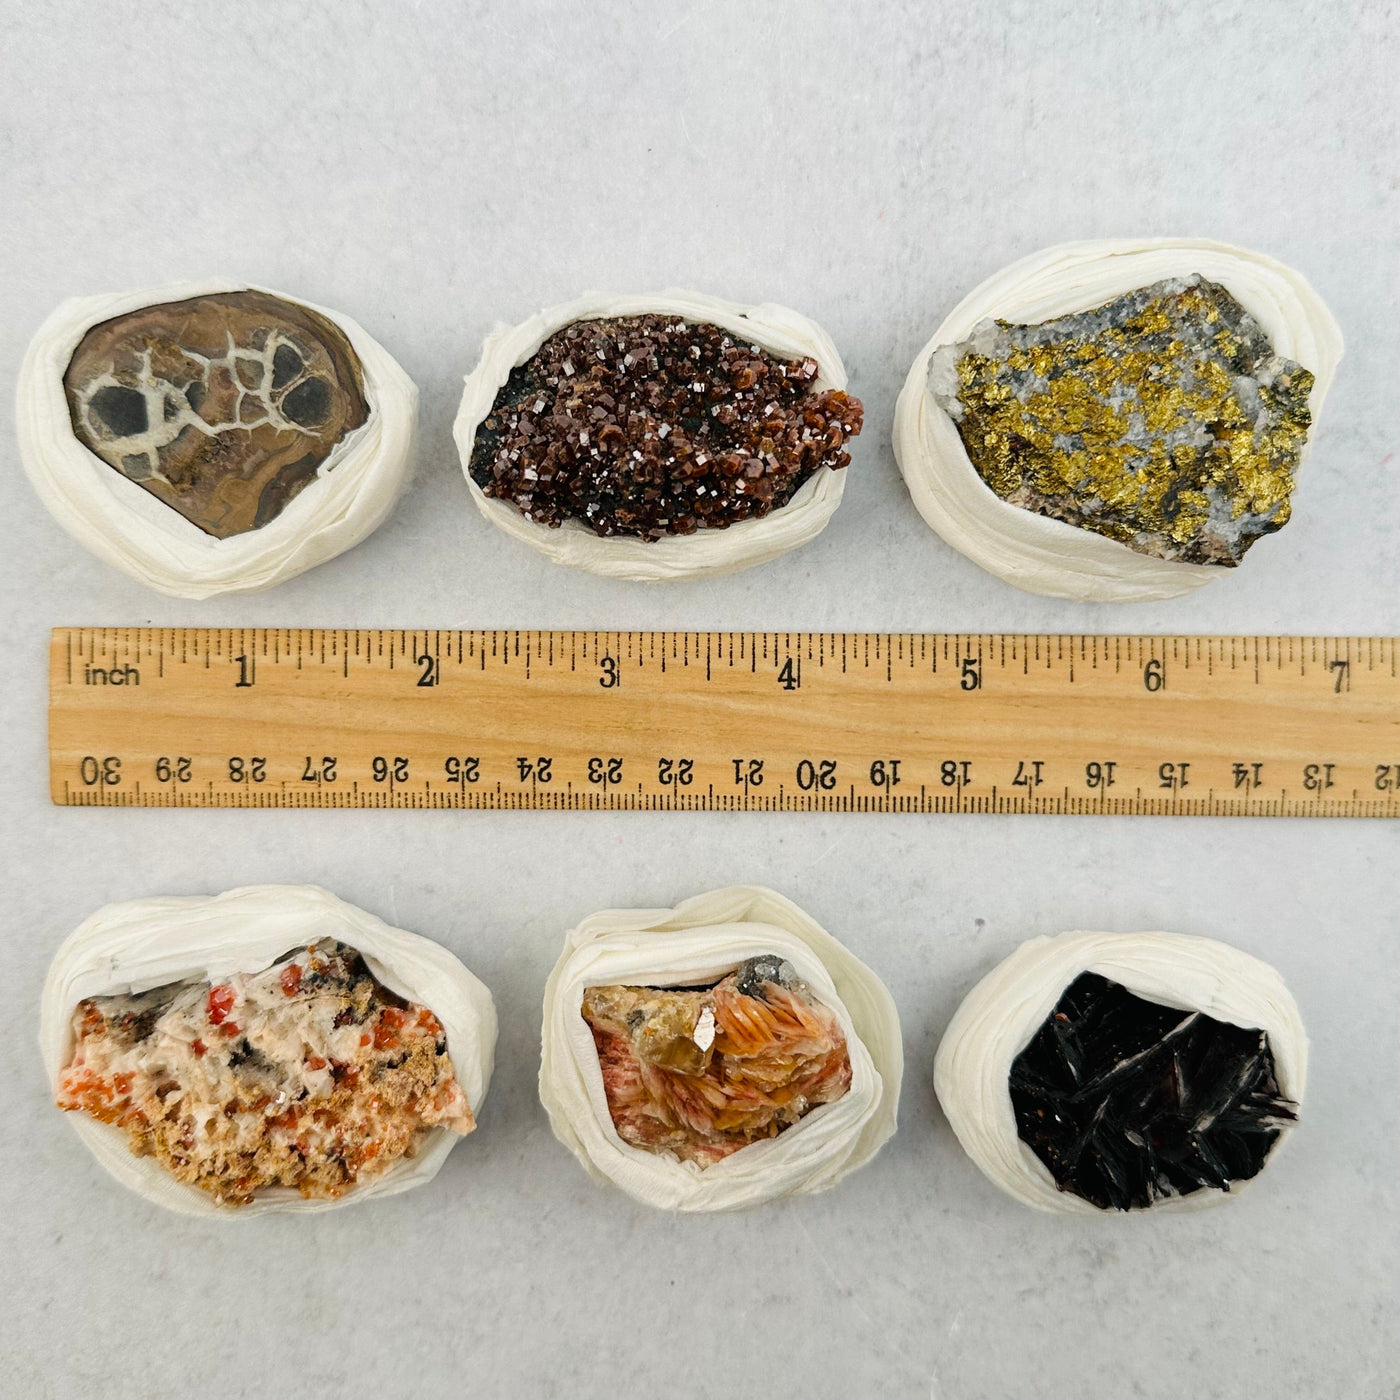 Assorted minerals next to a ruler showing they are about 1.75 inches wide.